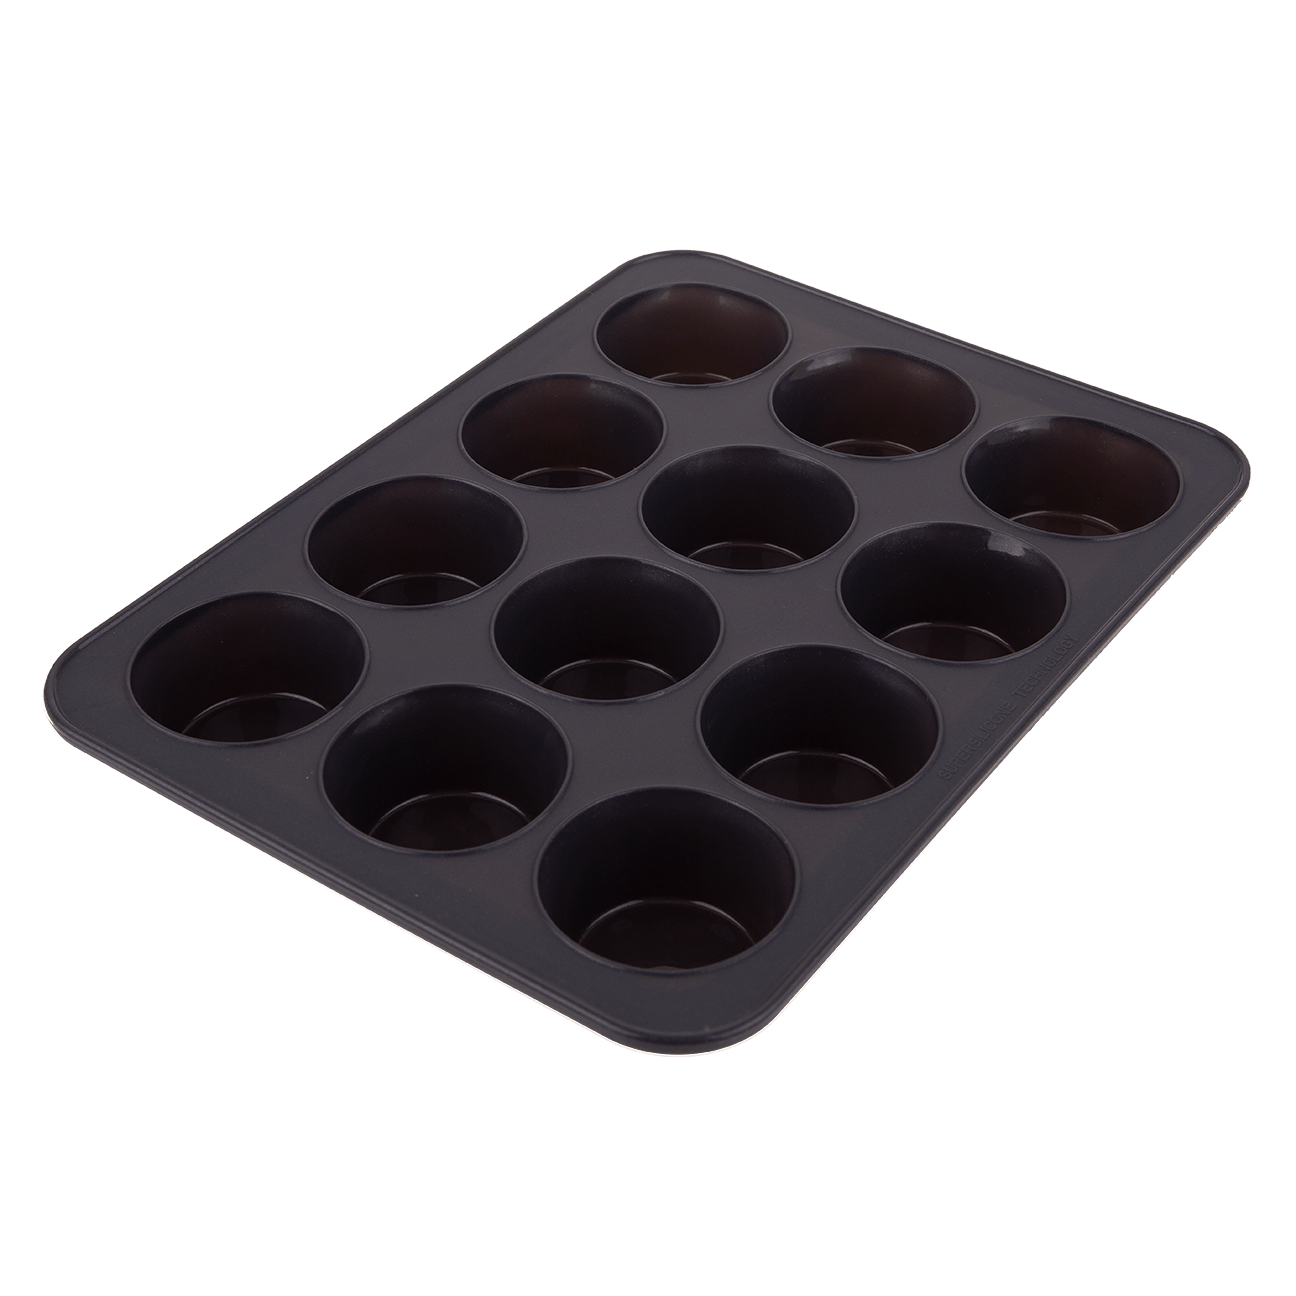 Thermomix-New-Zealand Daily Bake Silicone Muffin Trays - Steel frame Silicone Muffin - 12 hole